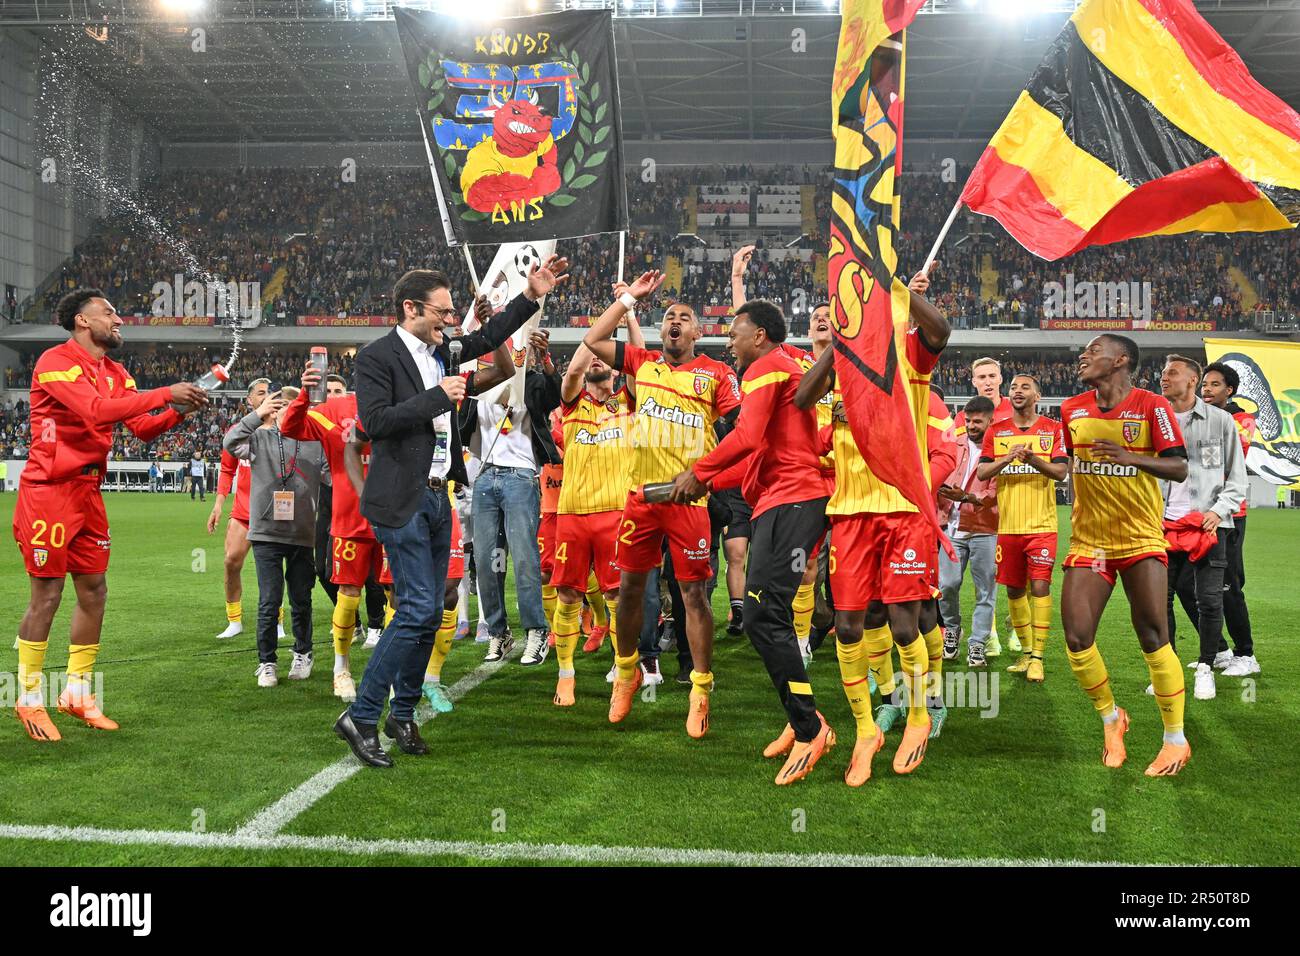 President Joseph Oughourlian of RC Lens pictured celebrating with his  players of RC Lens after winning a soccer game between t Racing Club de Lens  and AC Ajaccio, on the 37th matchday